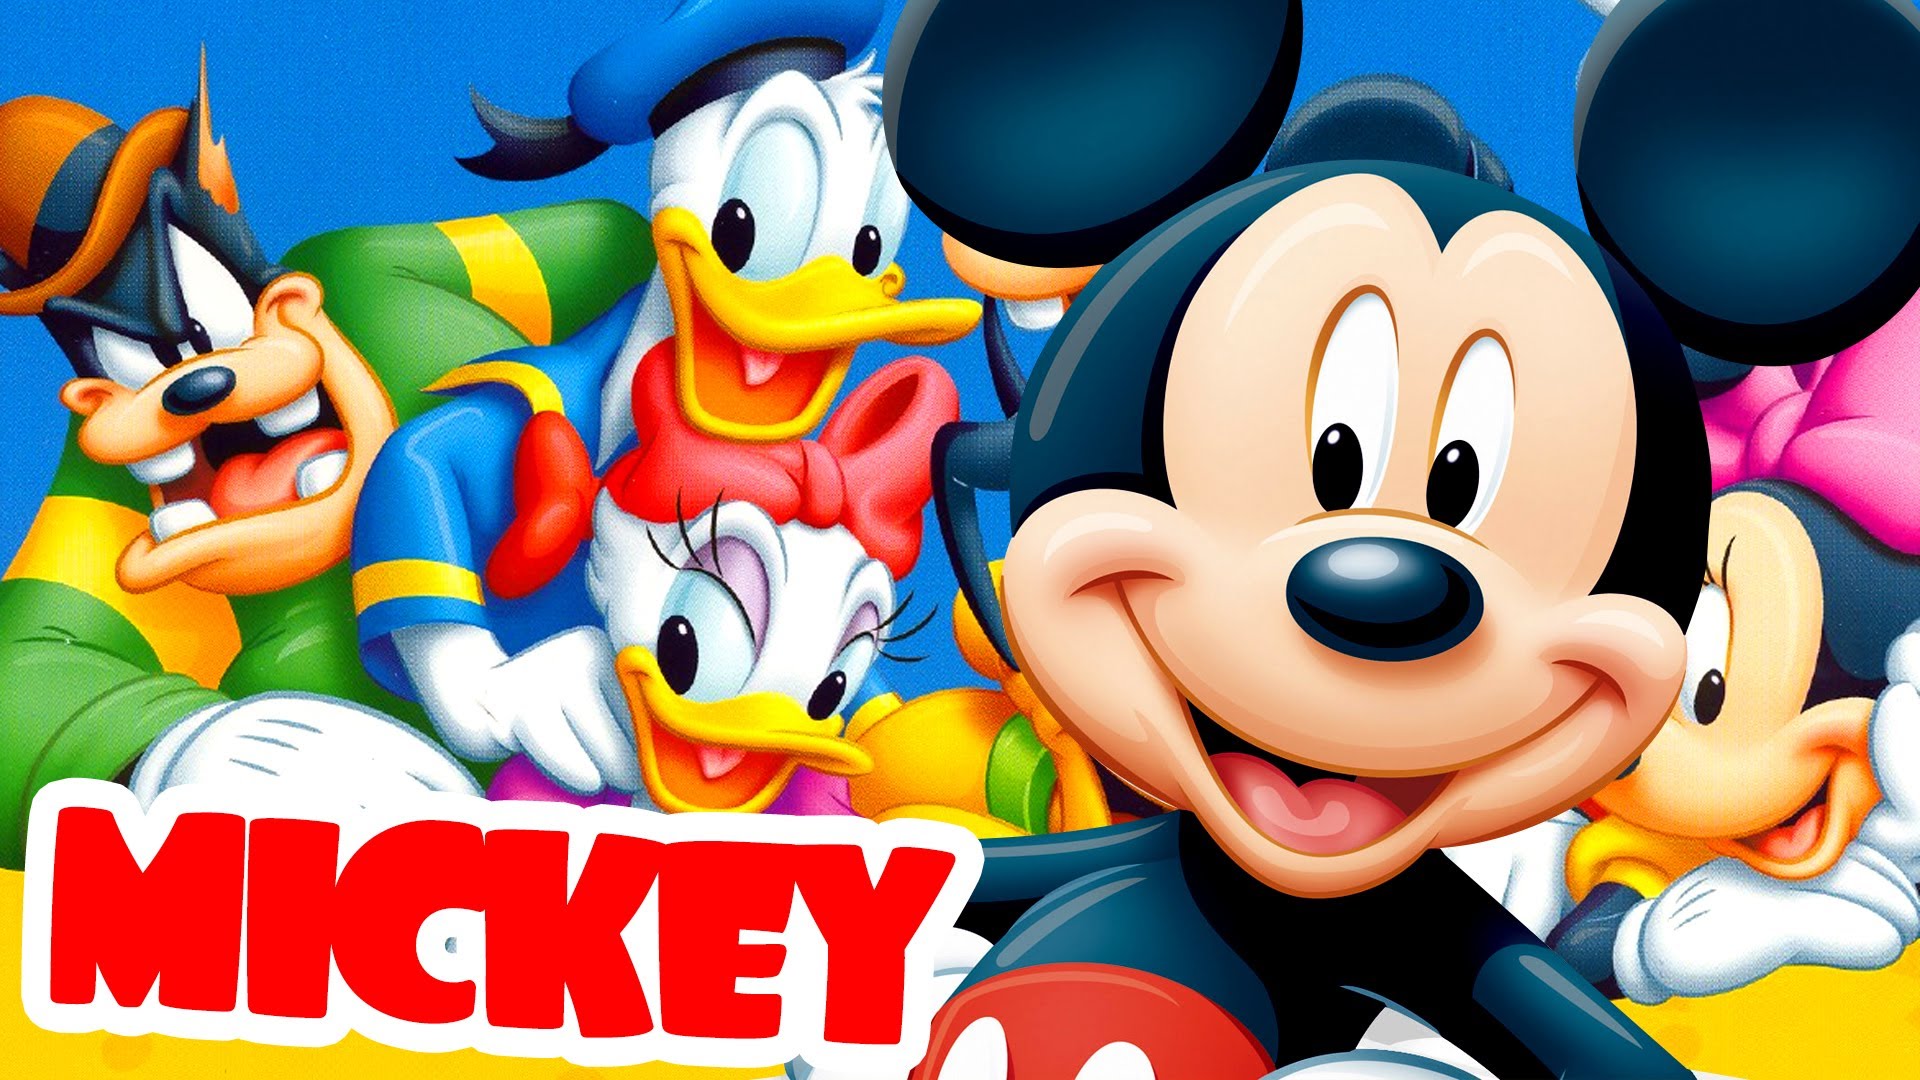 Disney's Mickey Mouse Video Game: Castle of Illusion starring Mickey -  Closed Captions by CCTubes